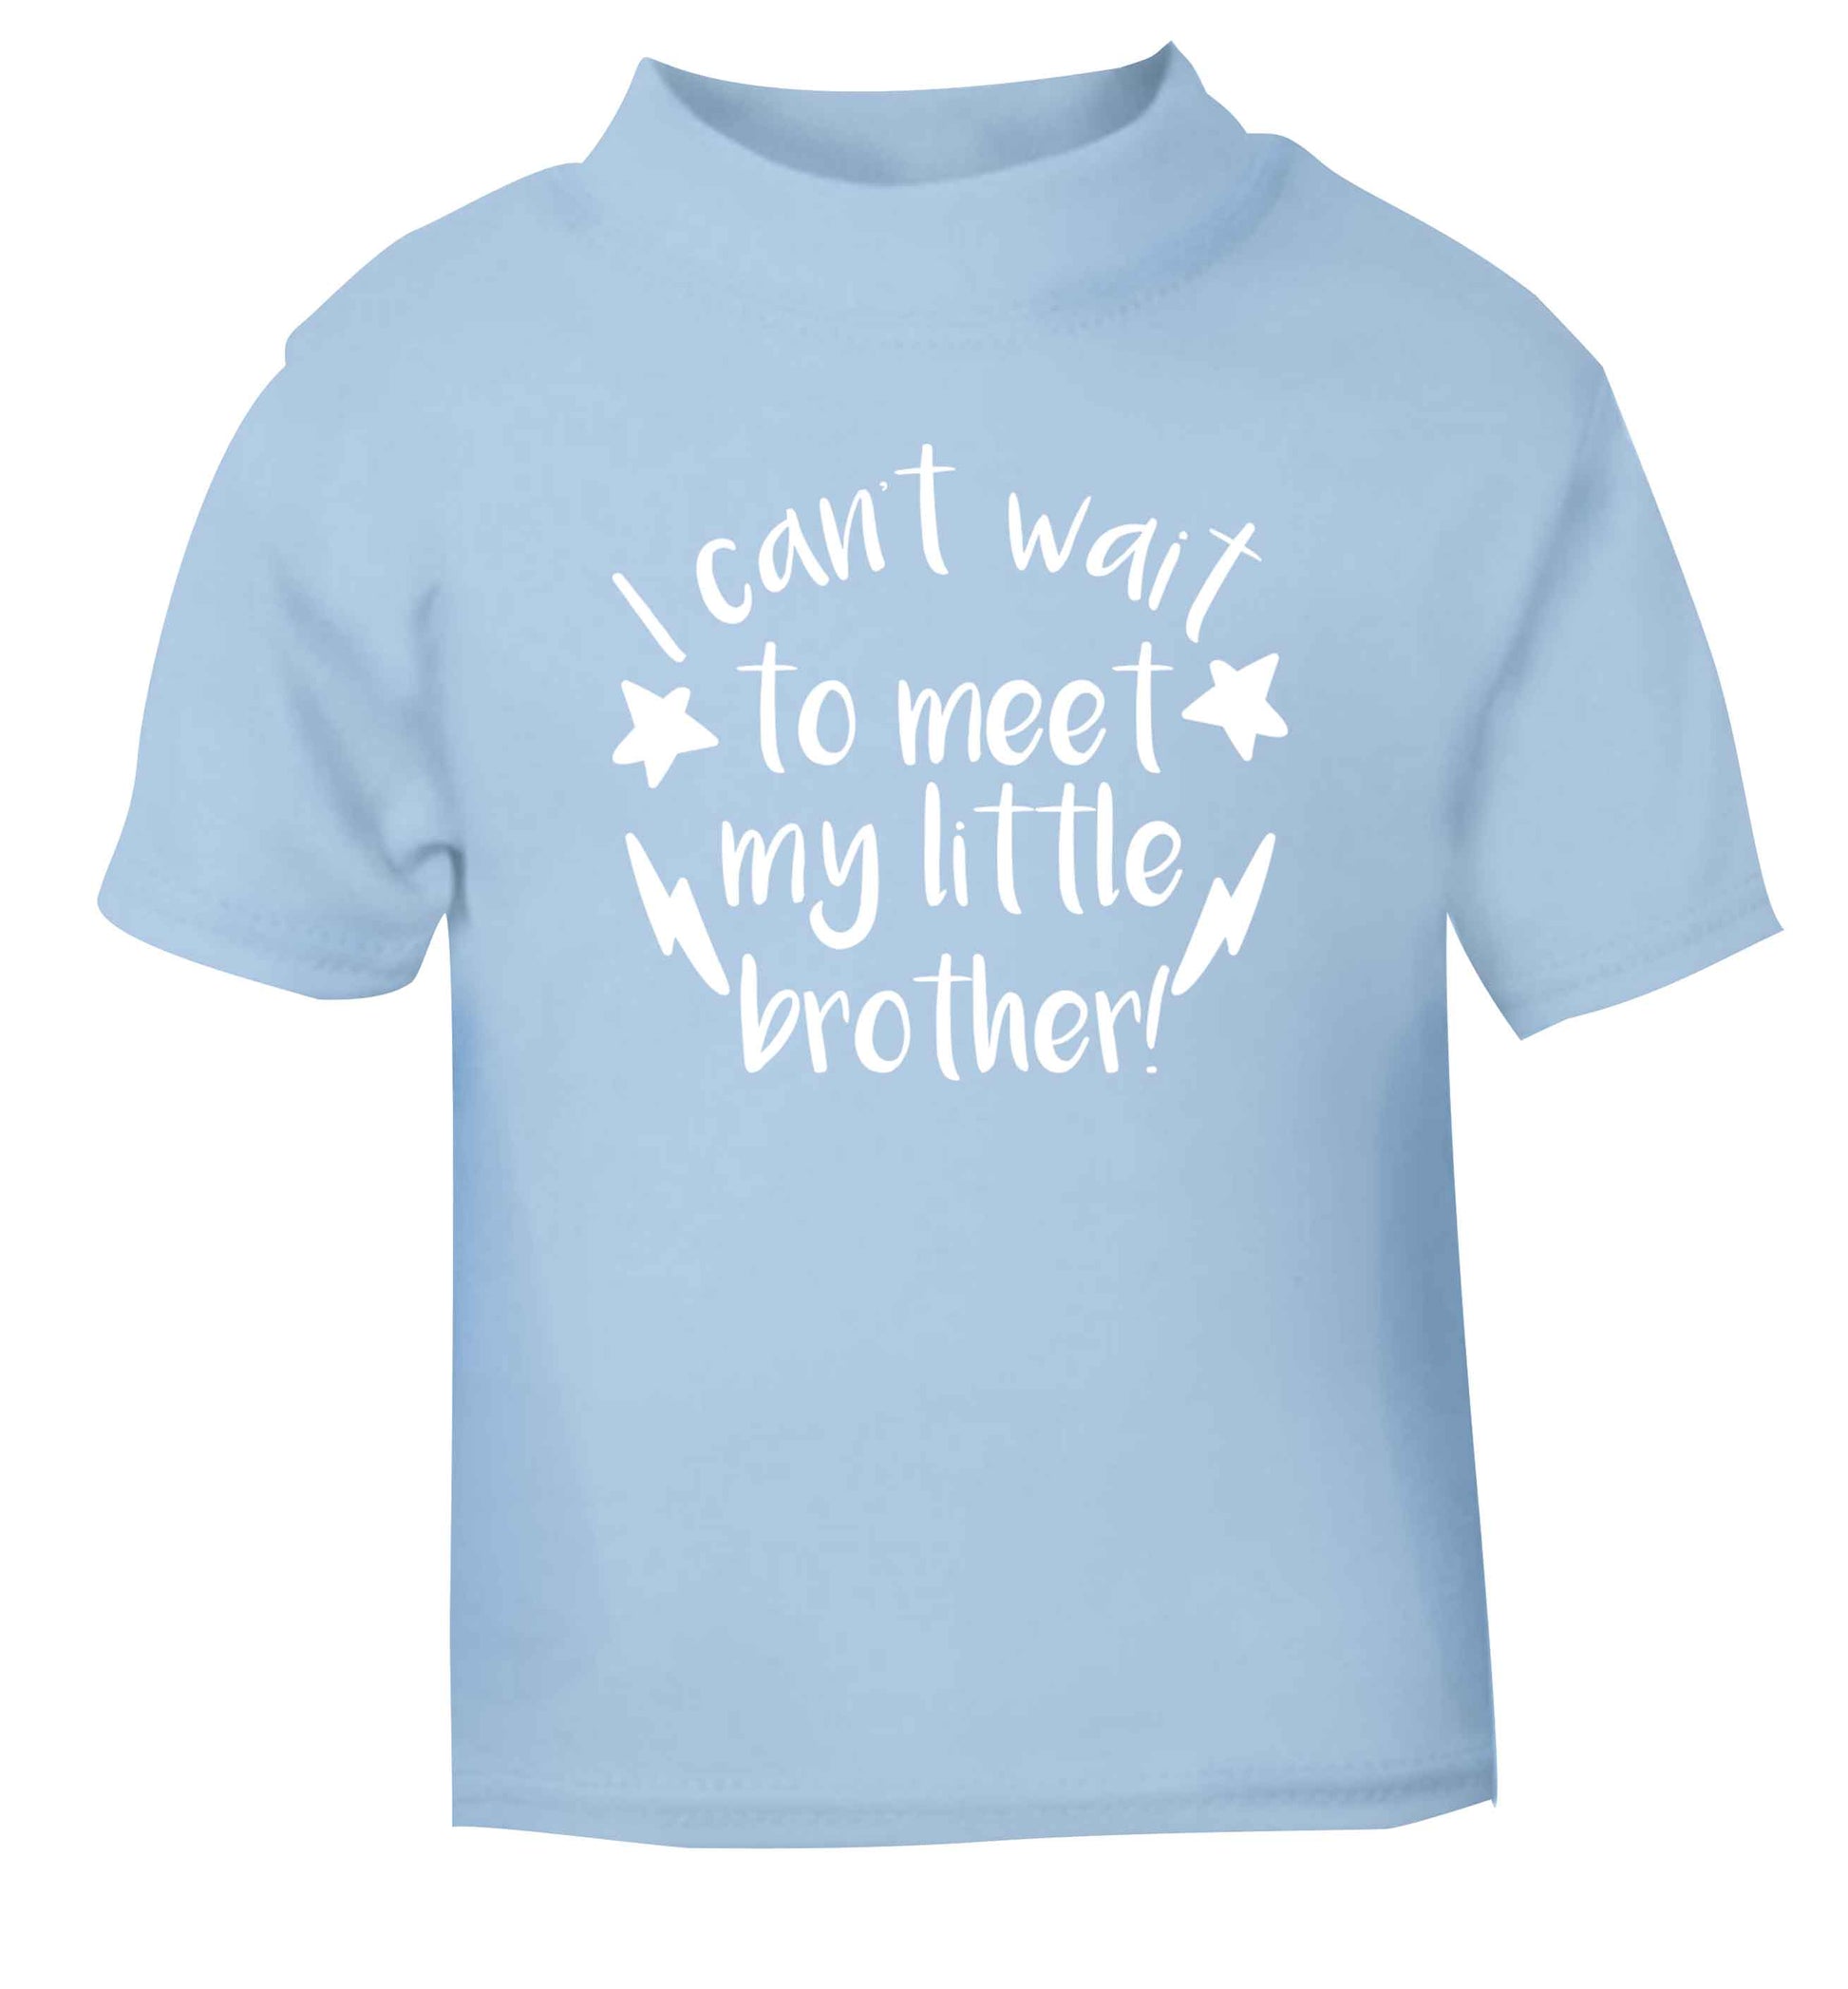 I can't wait to meet my sister! light blue Baby Toddler Tshirt 2 Years